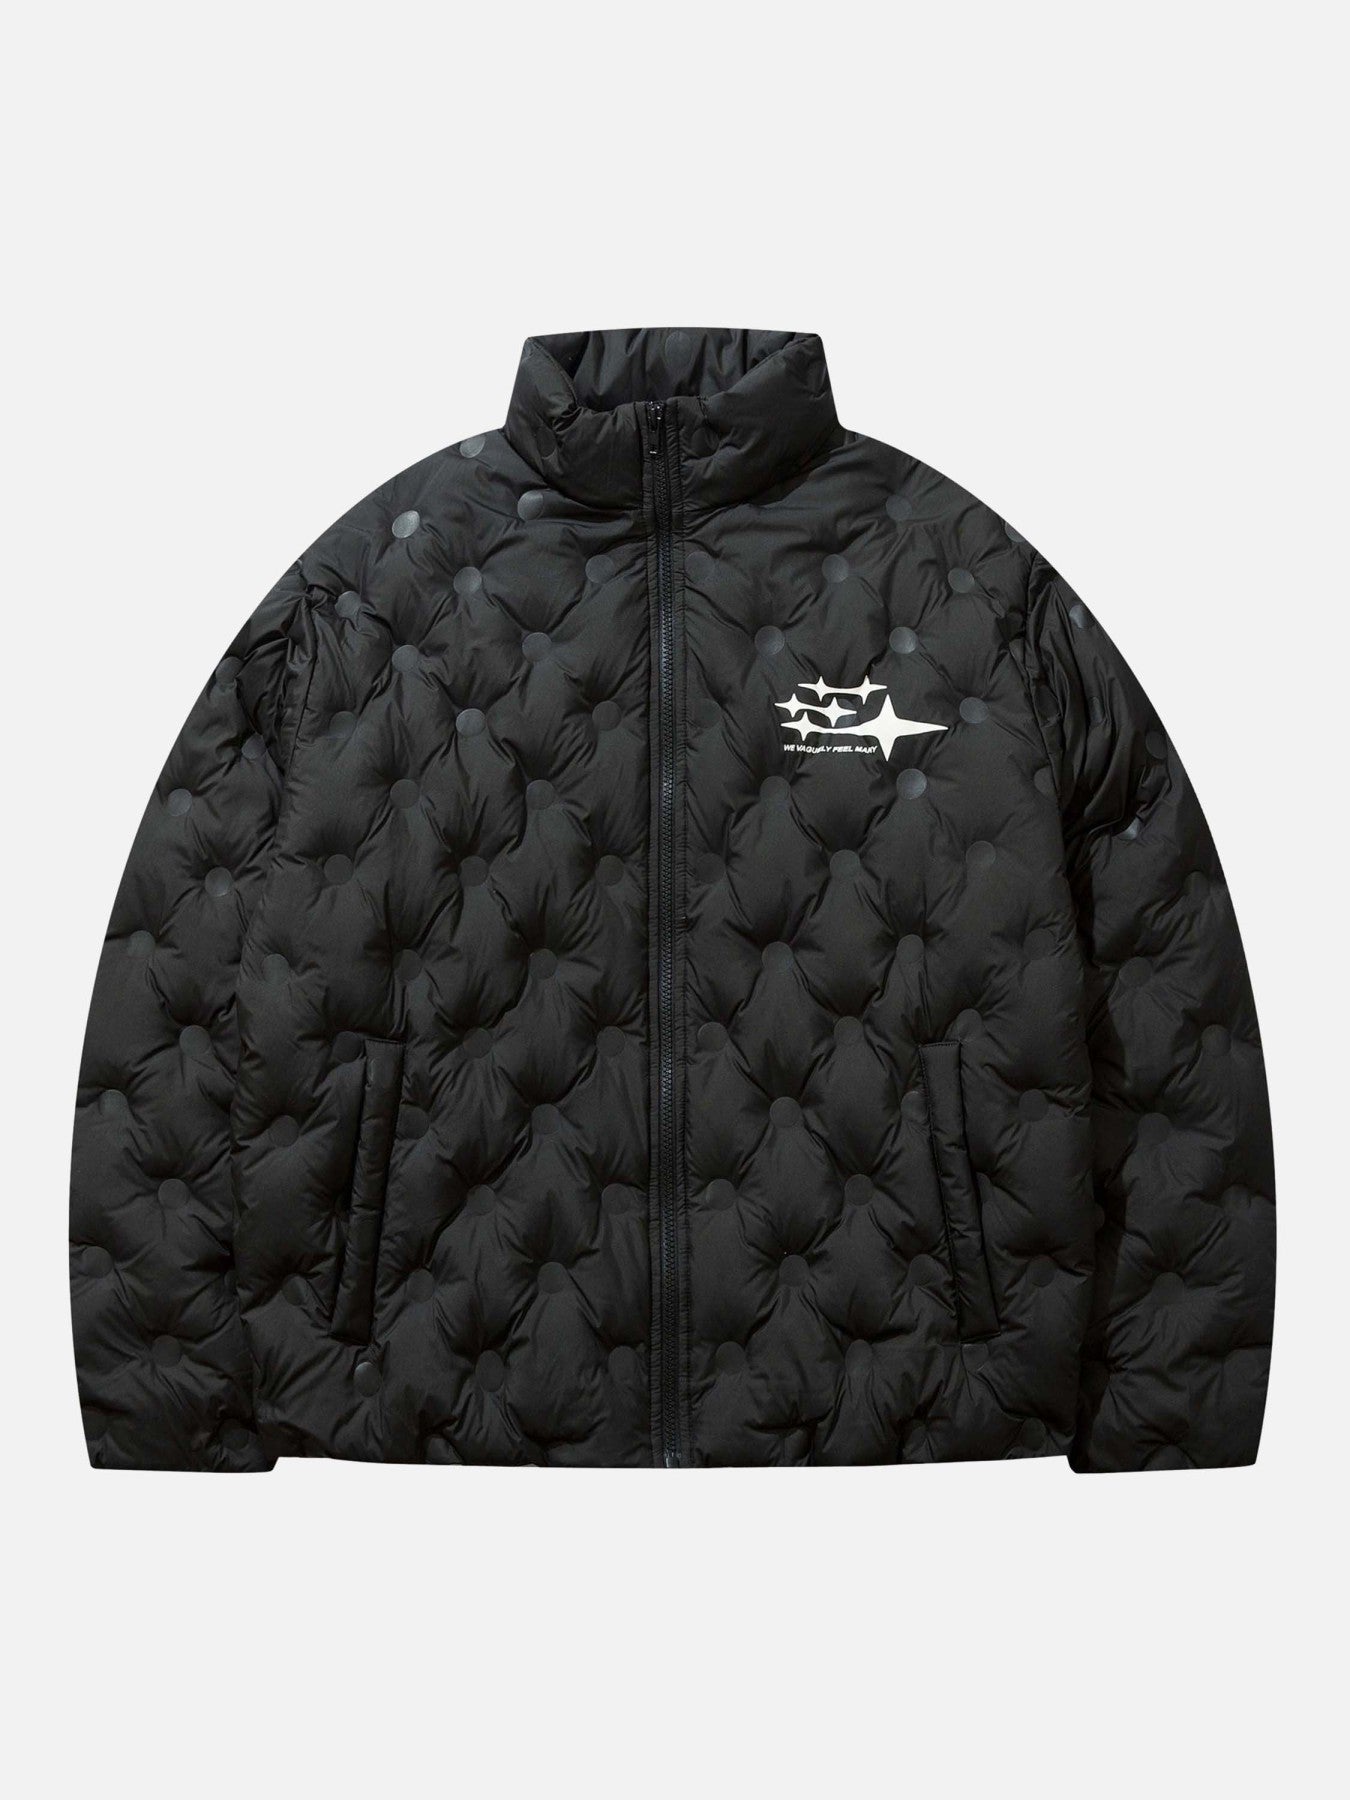 Thesupermade Polaris Letter Print Stand Collar Down Jacket